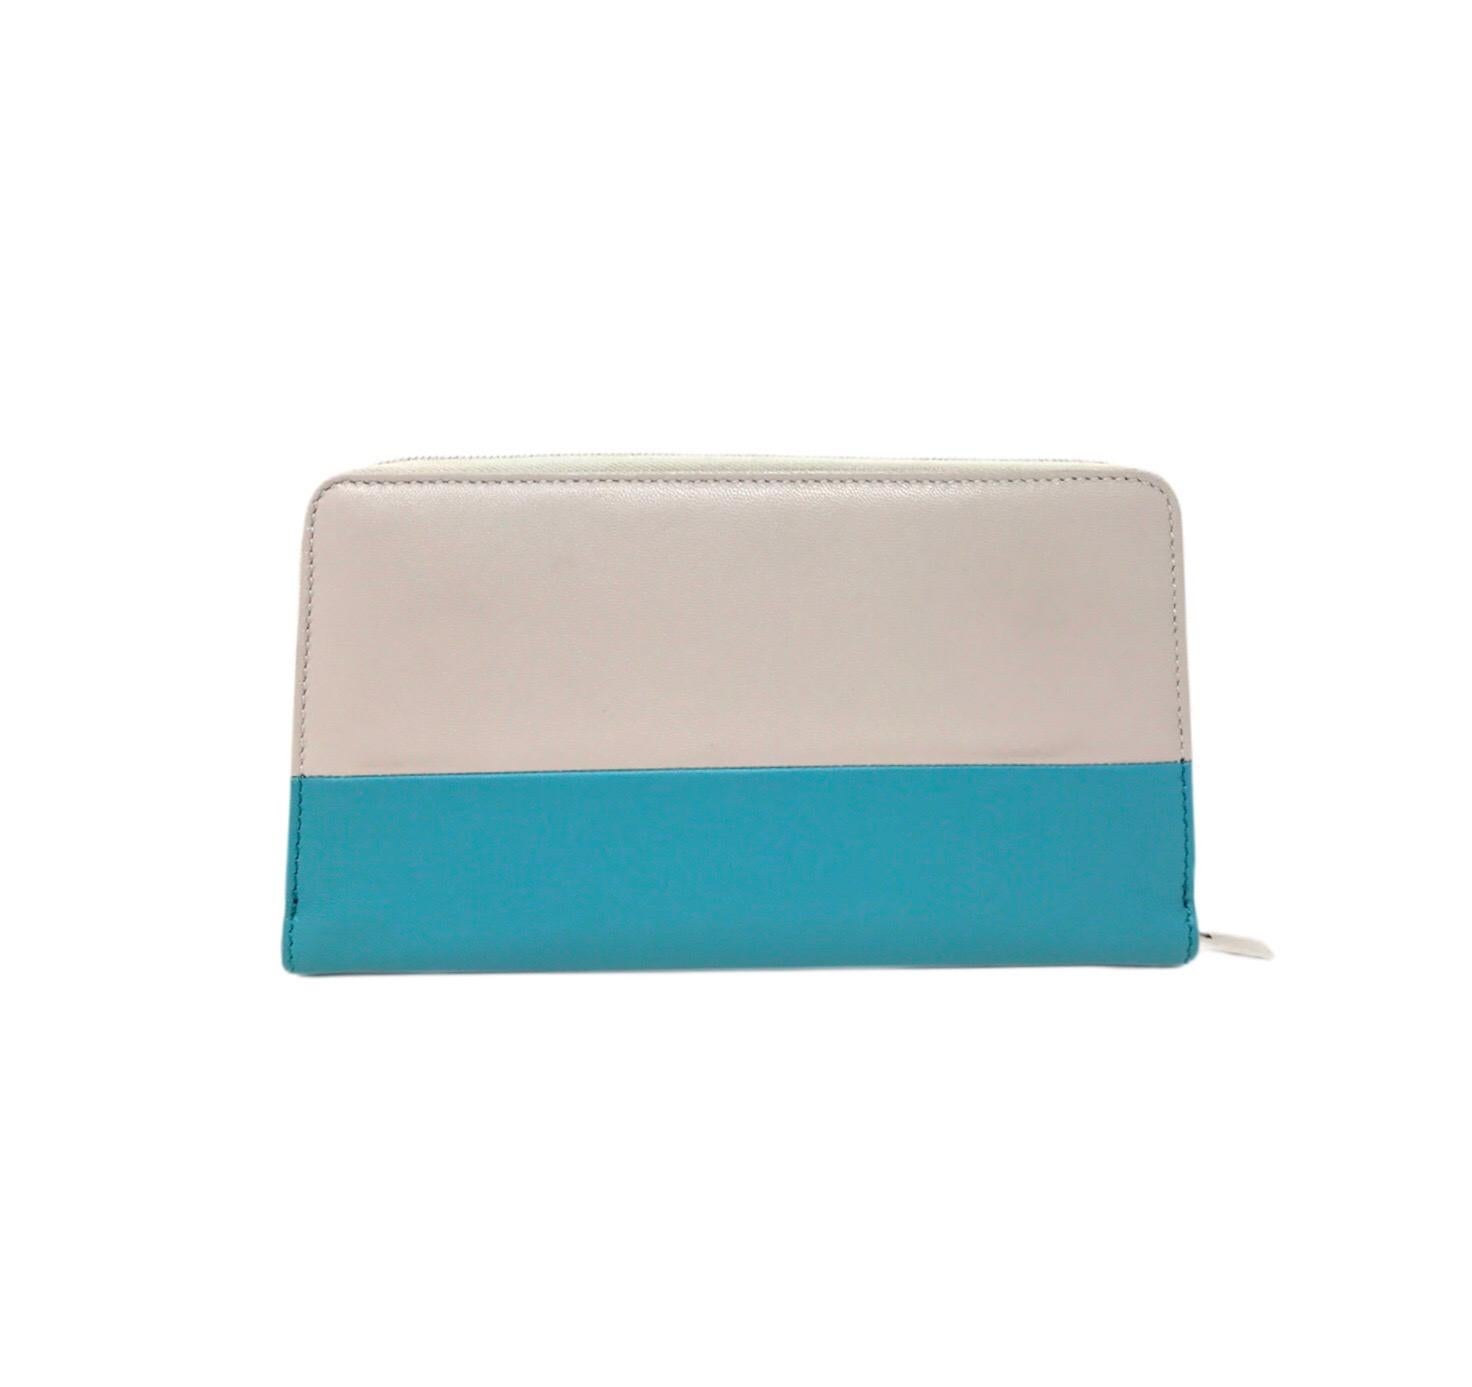 Celine Zippy wallet. In smooth gray and light blue lambskin, card holder and zip pocket inside, in excellent condition, size 18 cm

Silver metal closure.